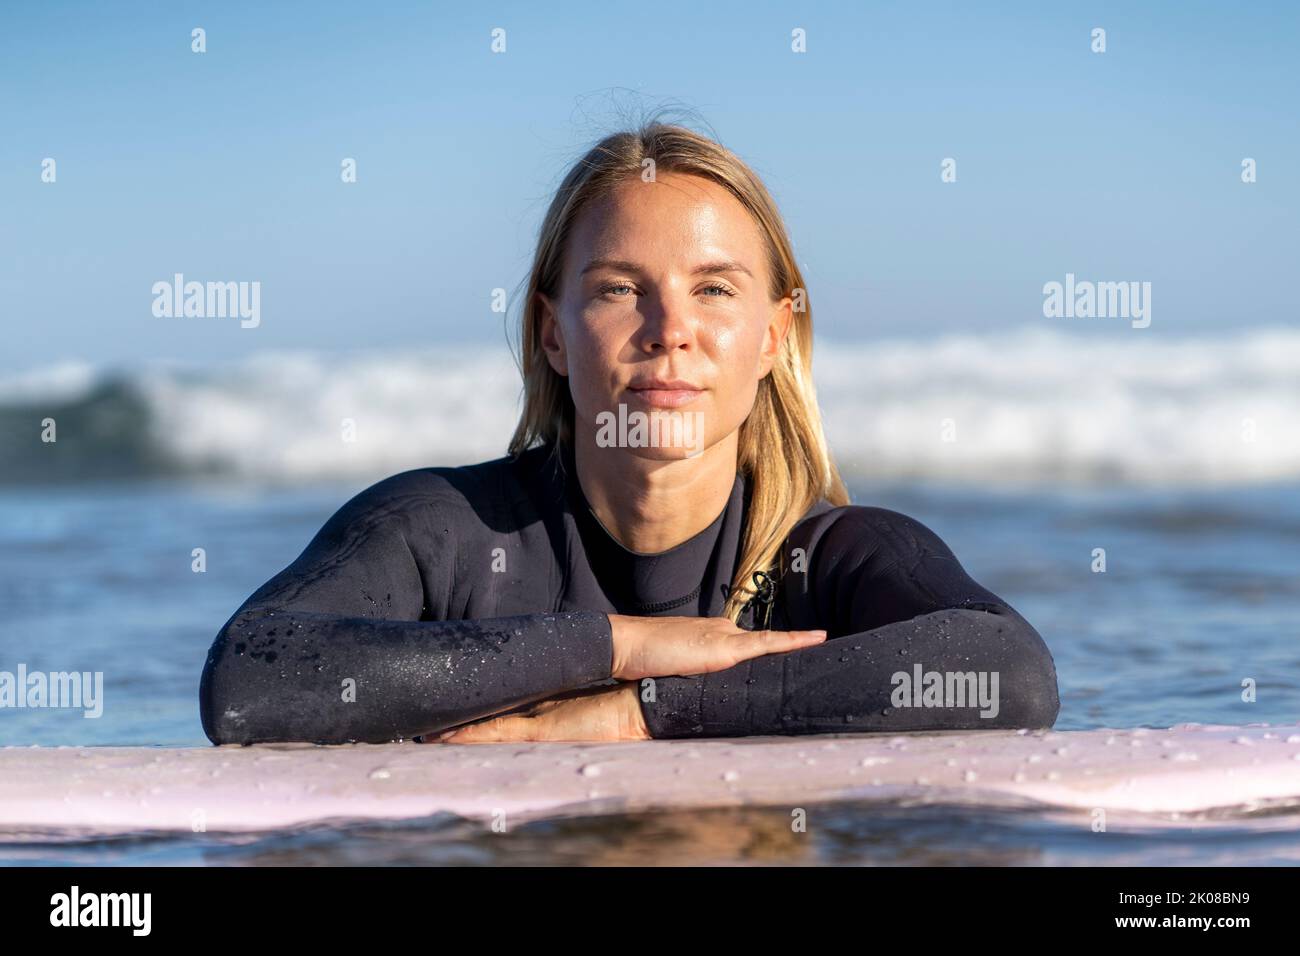 Surfer girl with her surfboard looking at the camera. Female surfer woman Stock Photo